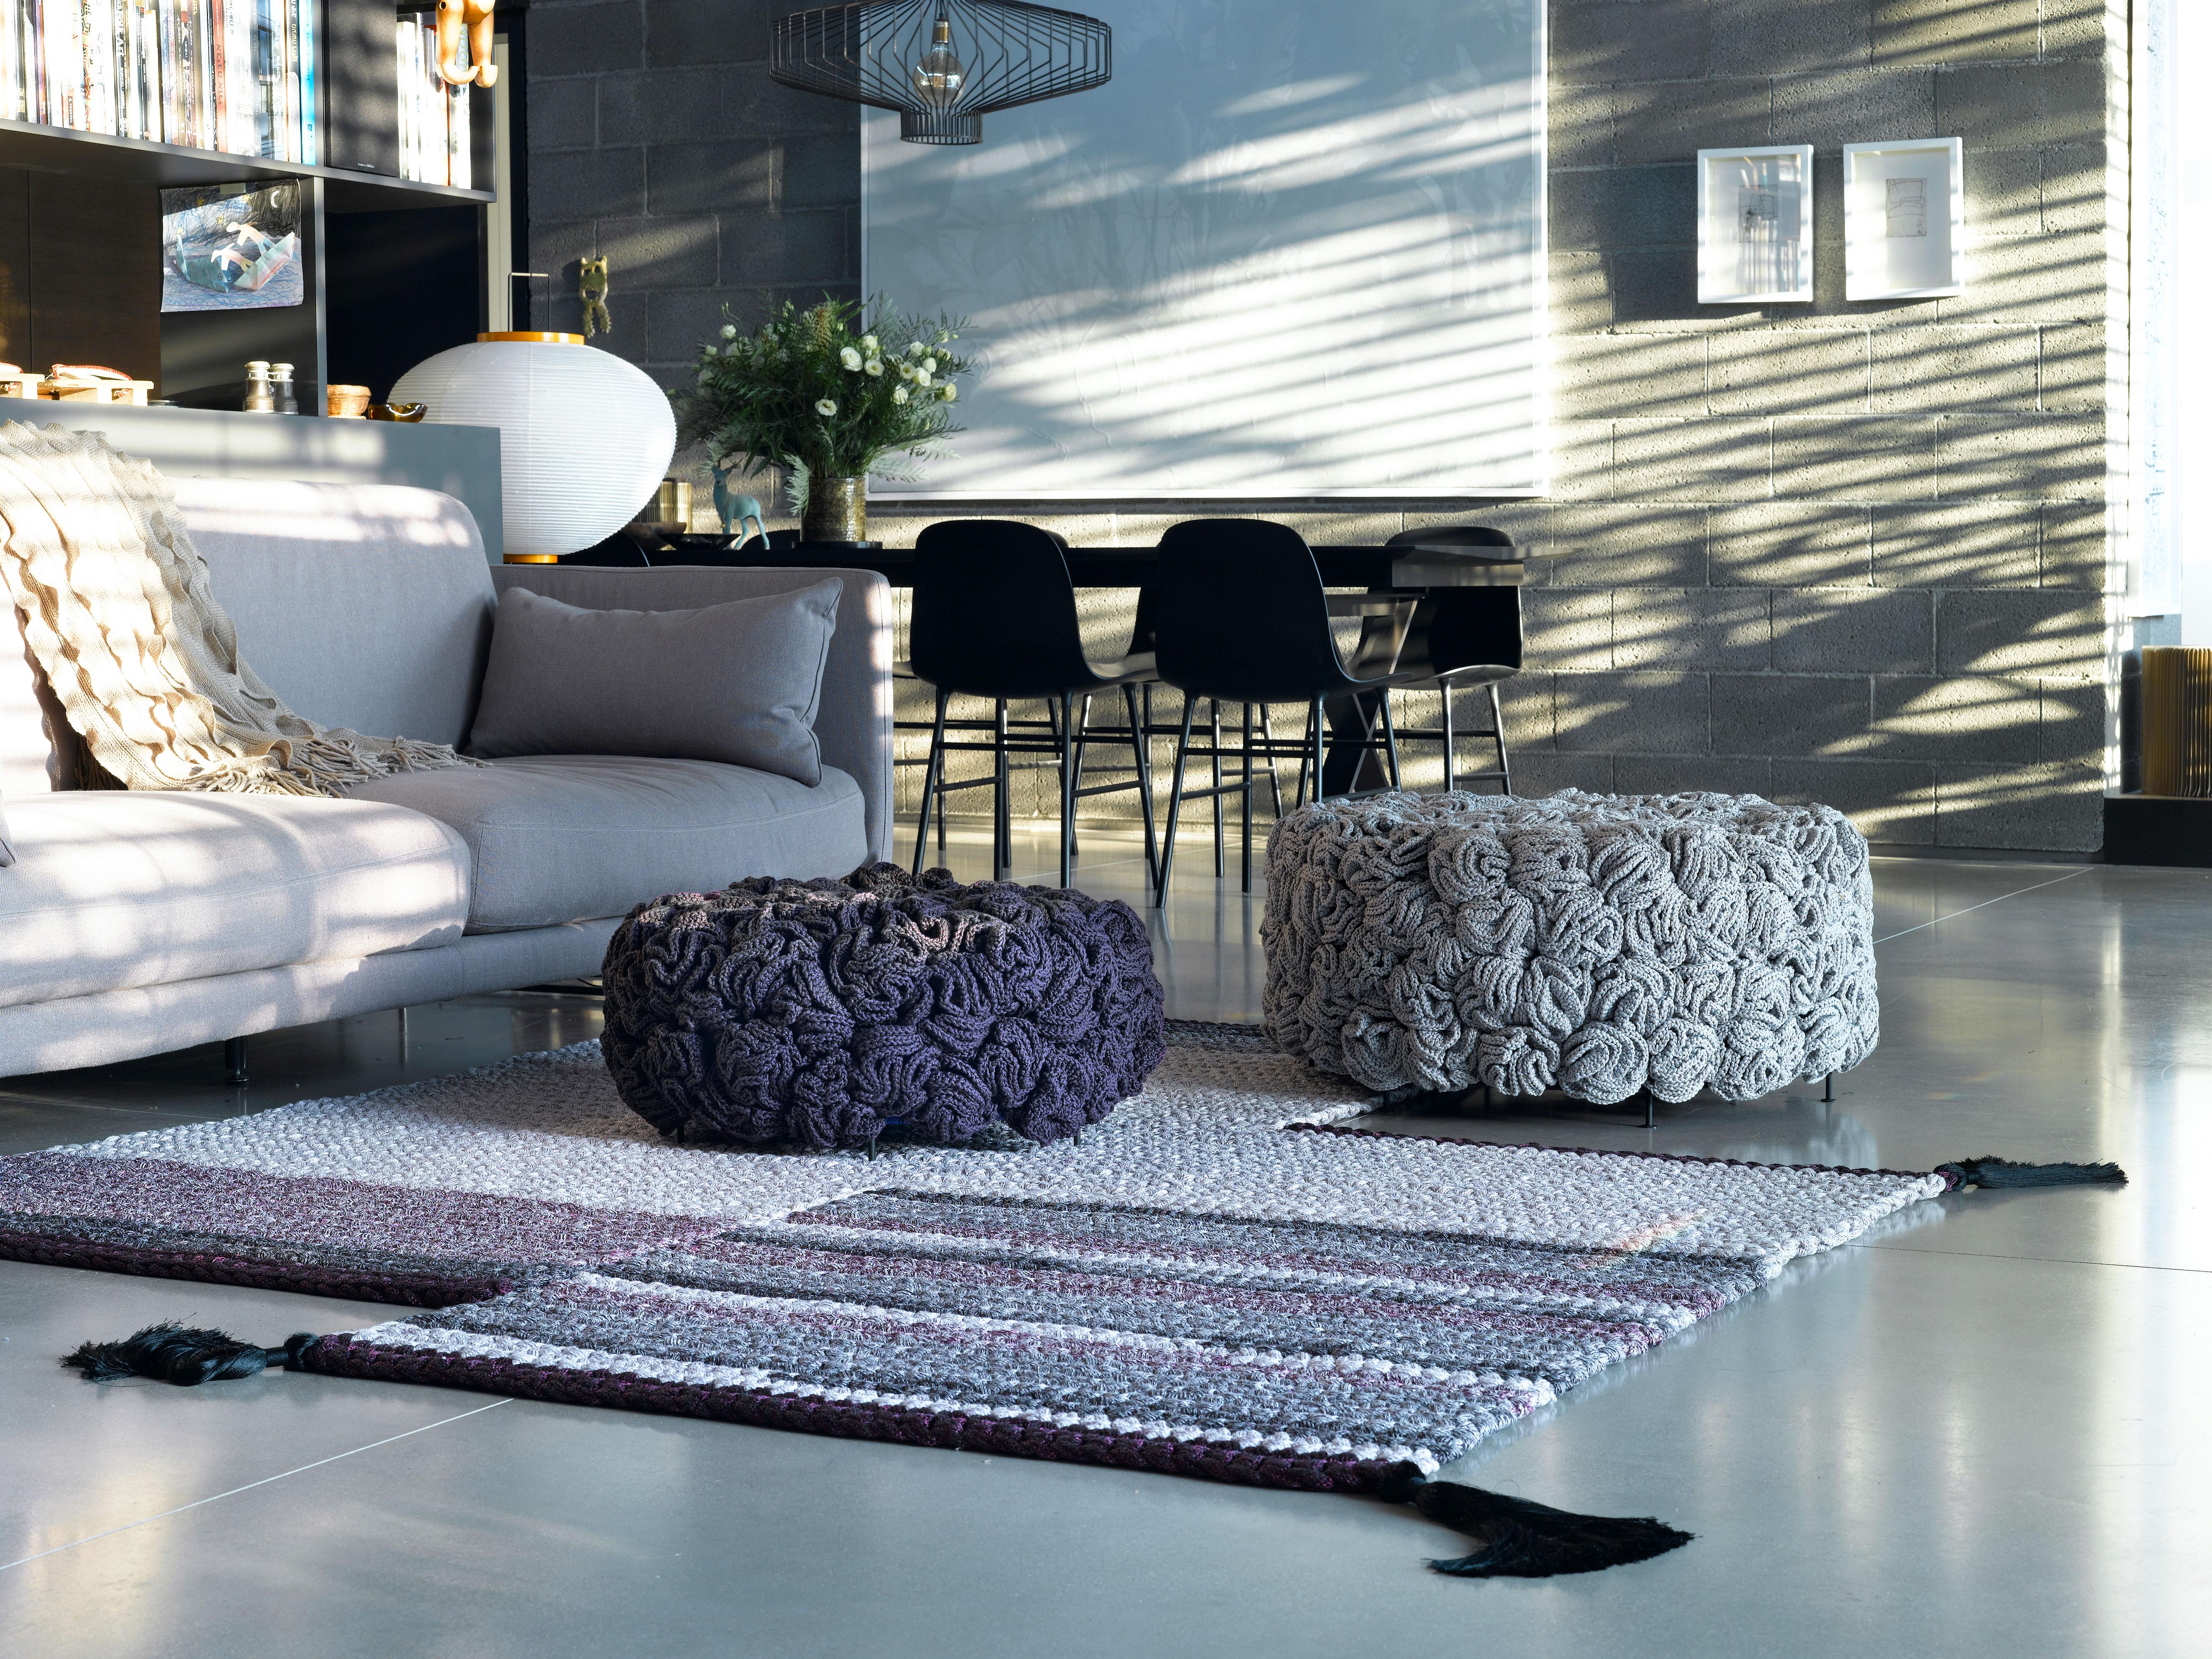 IOTA poufs challenge the classic upholstery technique and offers a new concept. The luscious, soft look and feel conceals a metal construction that gives it stiffness. The textile cover of the pouf is composed of dozens of hand knit flower-like